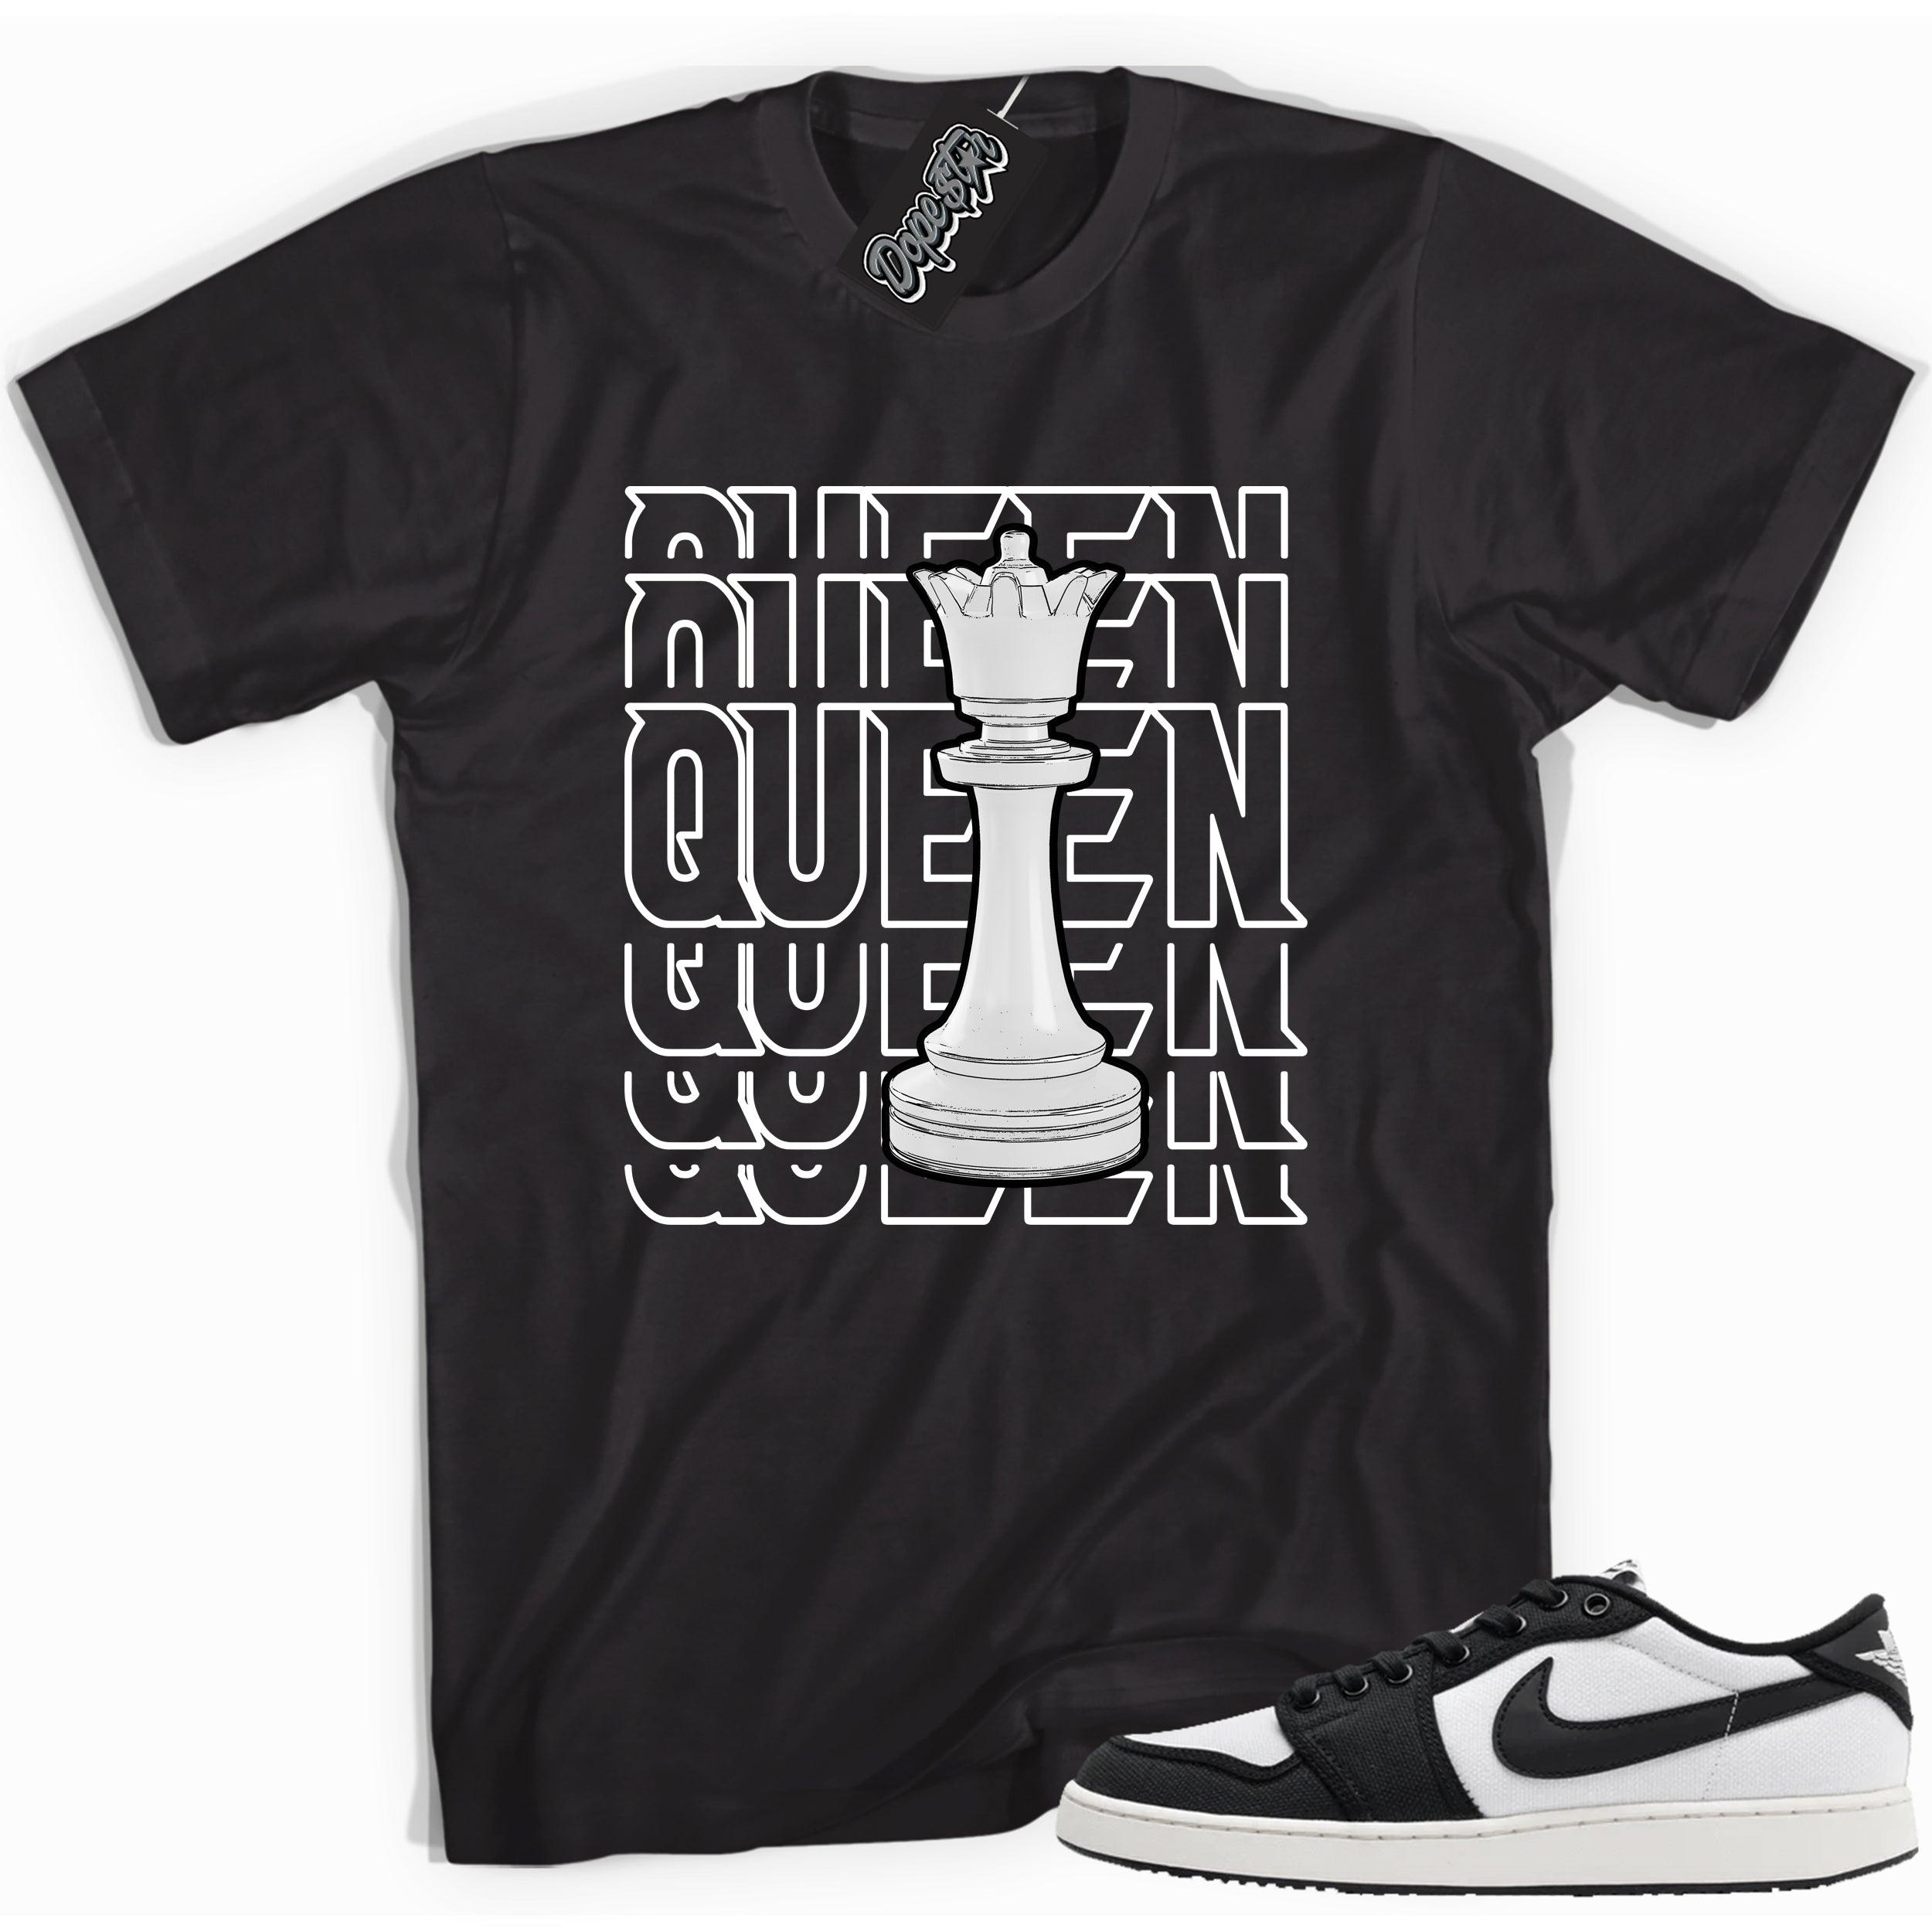 Cool black graphic tee with 'queen chess piece' print, that perfectly matches Air Jordan 1 Retro Ajko Low Black & White sneakers.